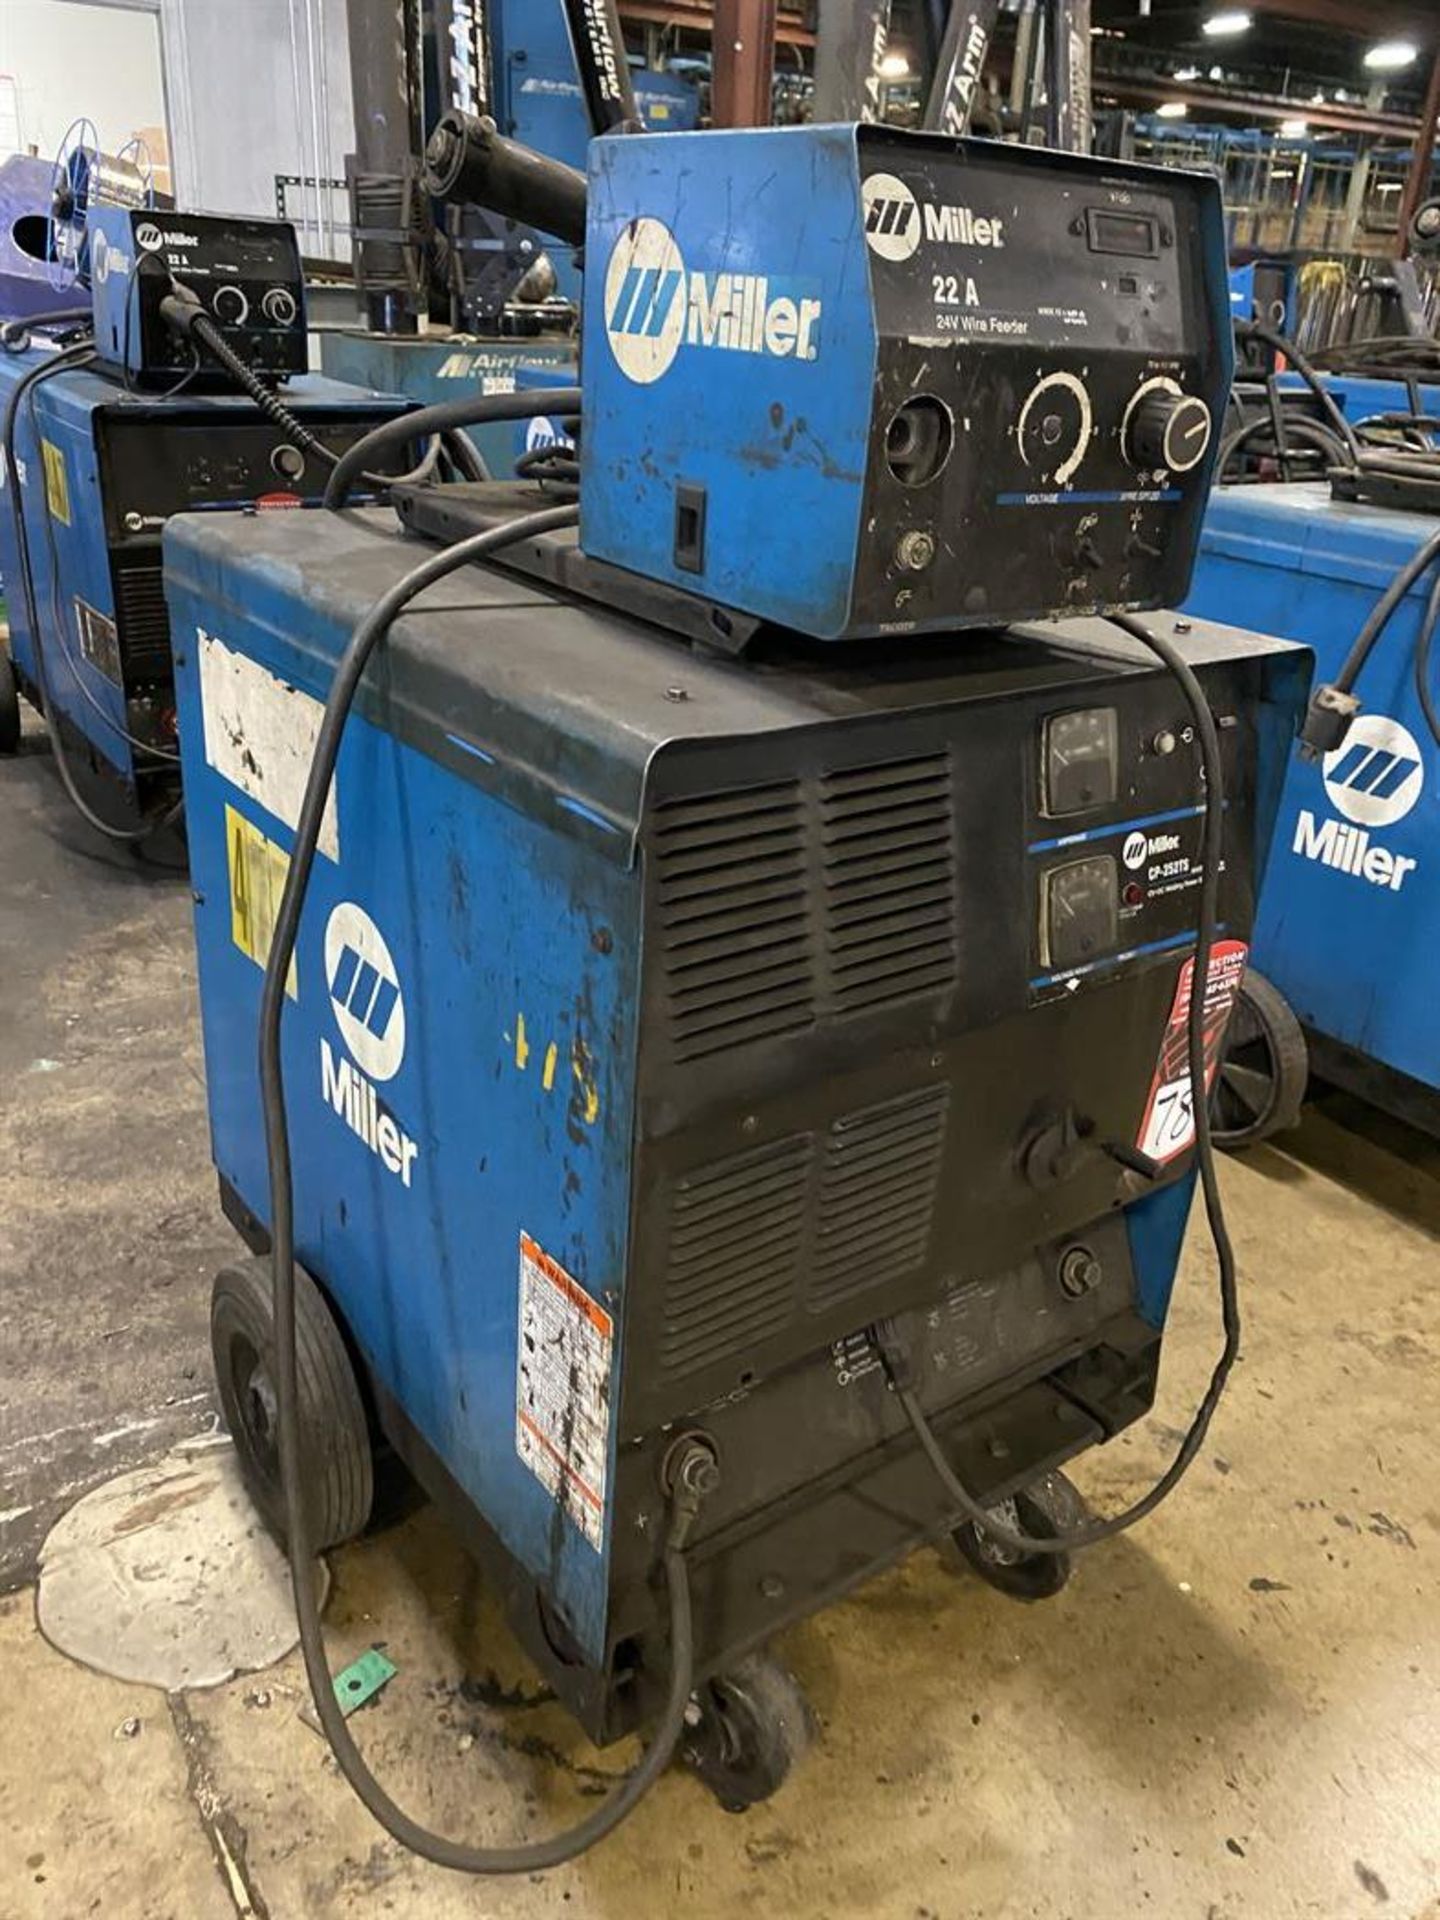 Miller CP-252TS Welding Power Source, s/n KH526767, w/ Miller 22A Wire Feed - Image 2 of 3